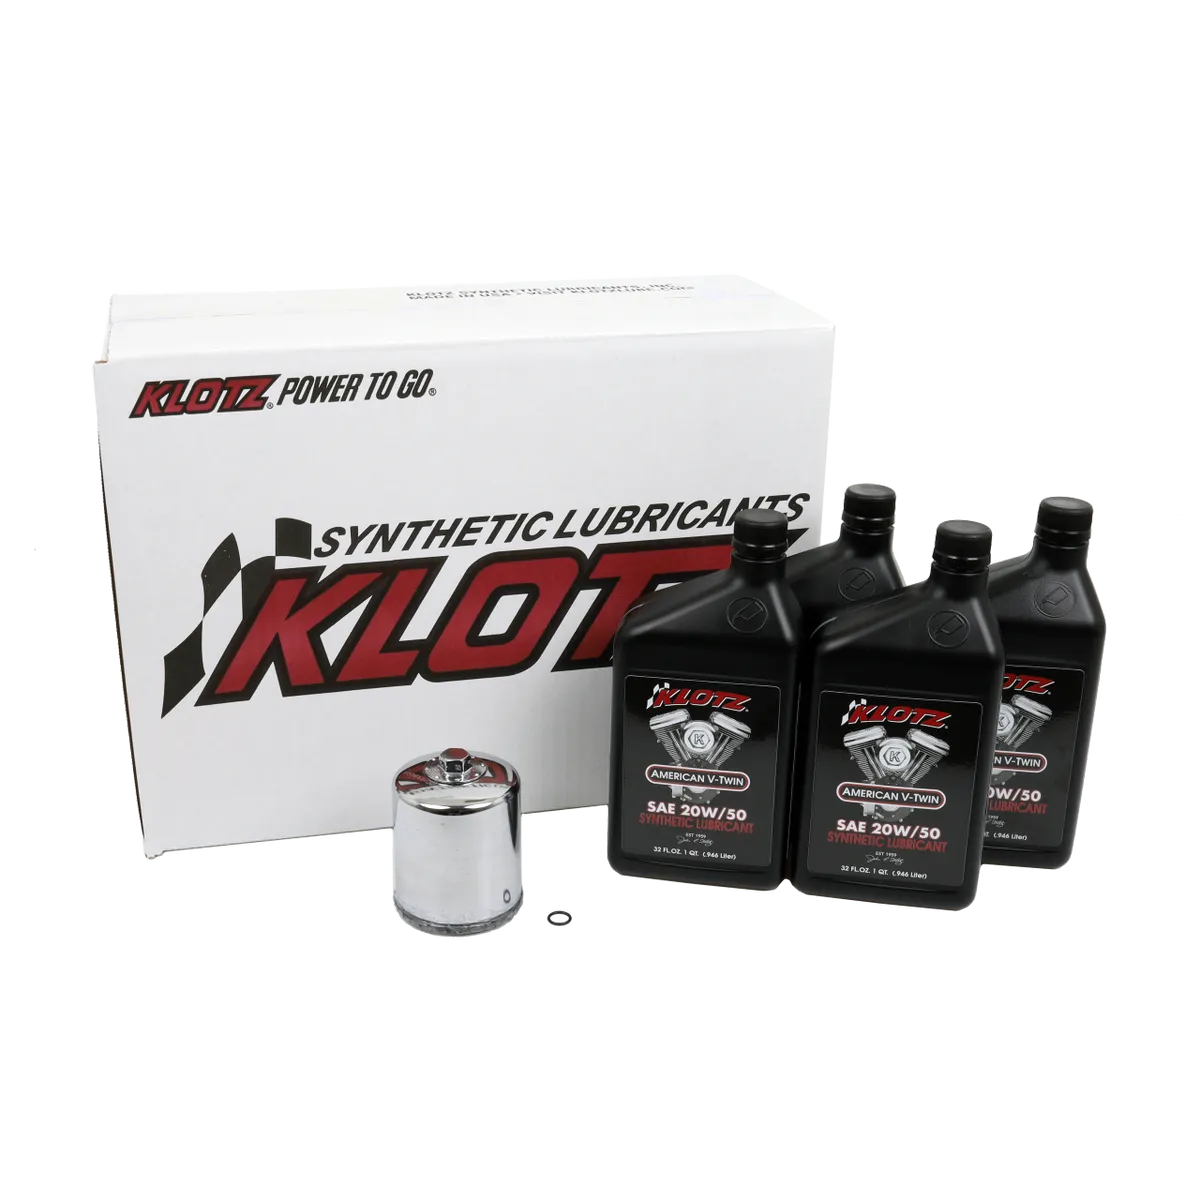 Experience the ultimate Klotz oil change kit for Harley-Davidson Sportster motorcycles (Evolution). Our high-quality synthetic lubricants deliver unmatched performance, maximizing your bike's potential on the road. Upgrade with Klotz.